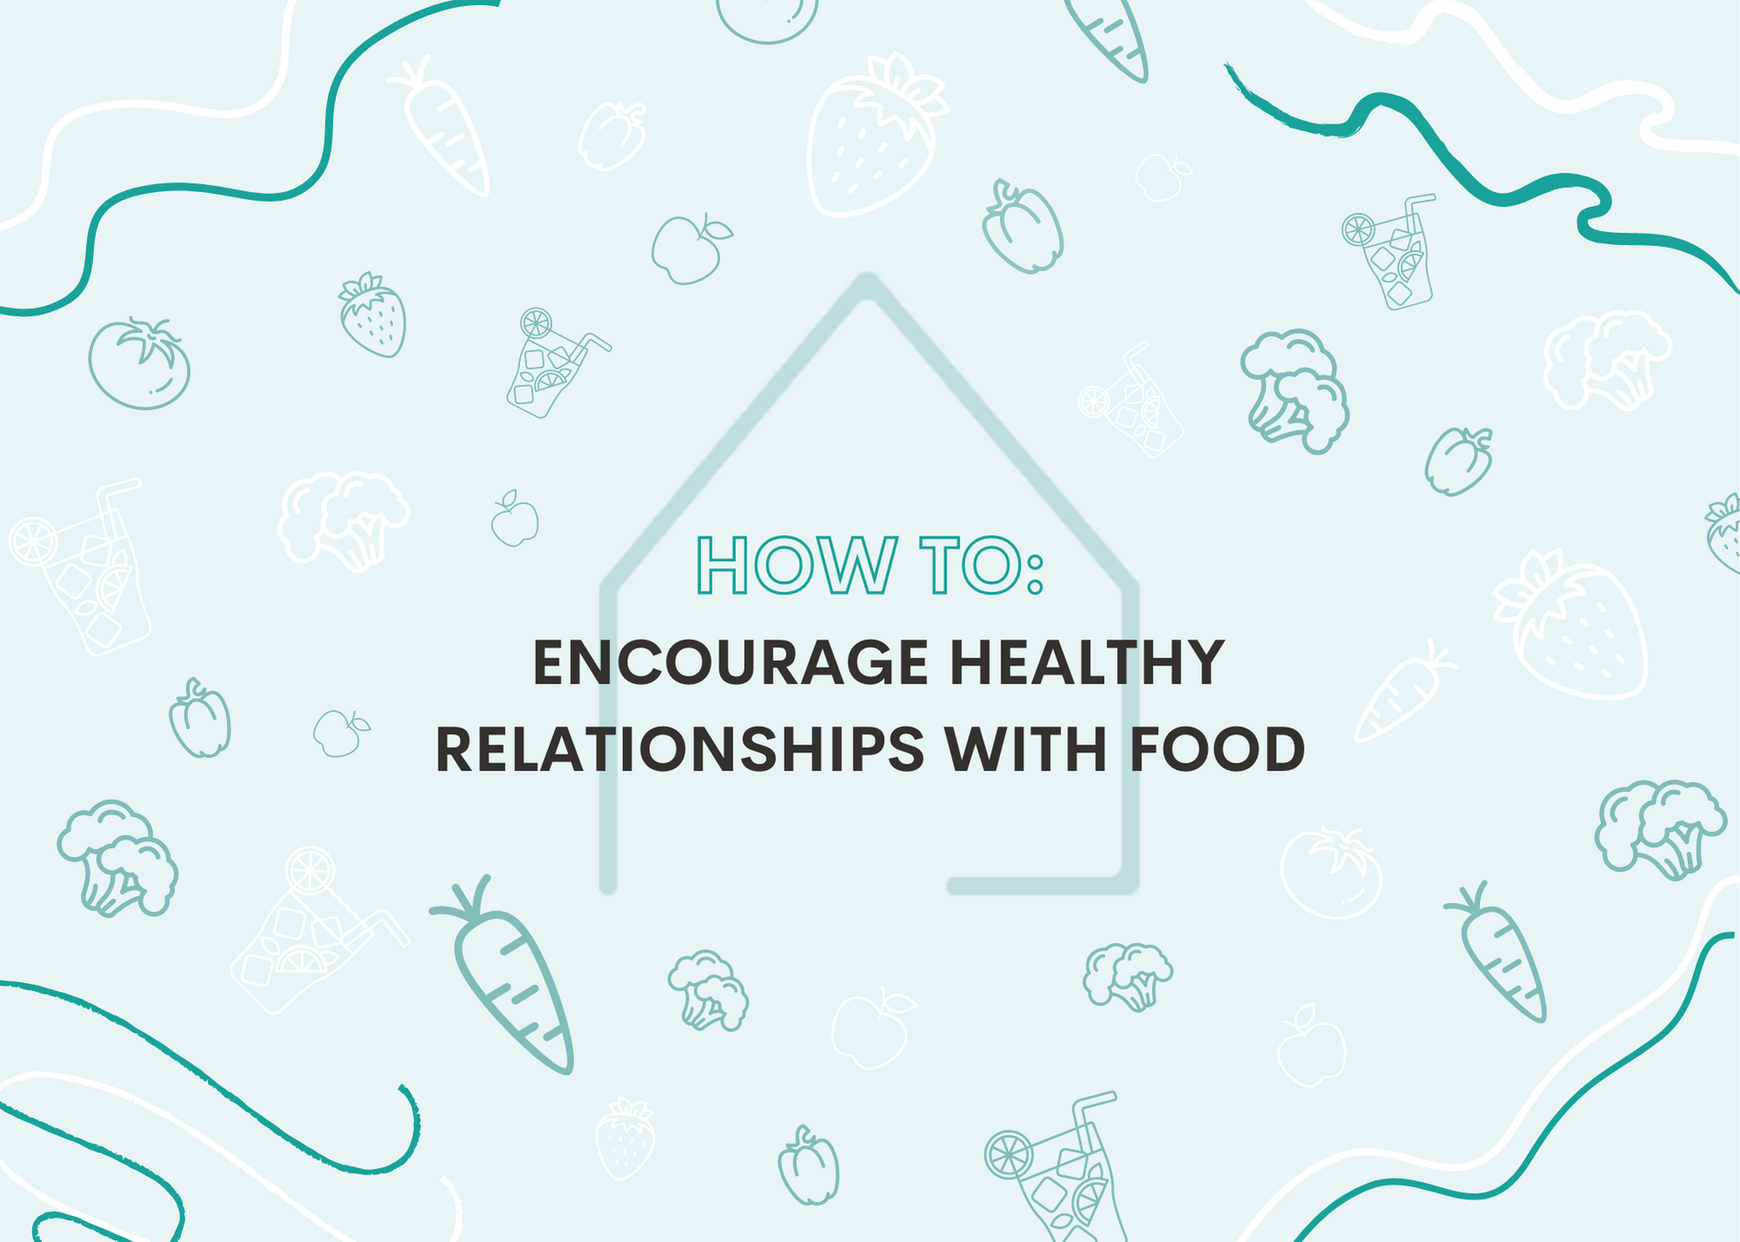 How to use a Family Meal Planner to Encourage Healthy Relationships with Food